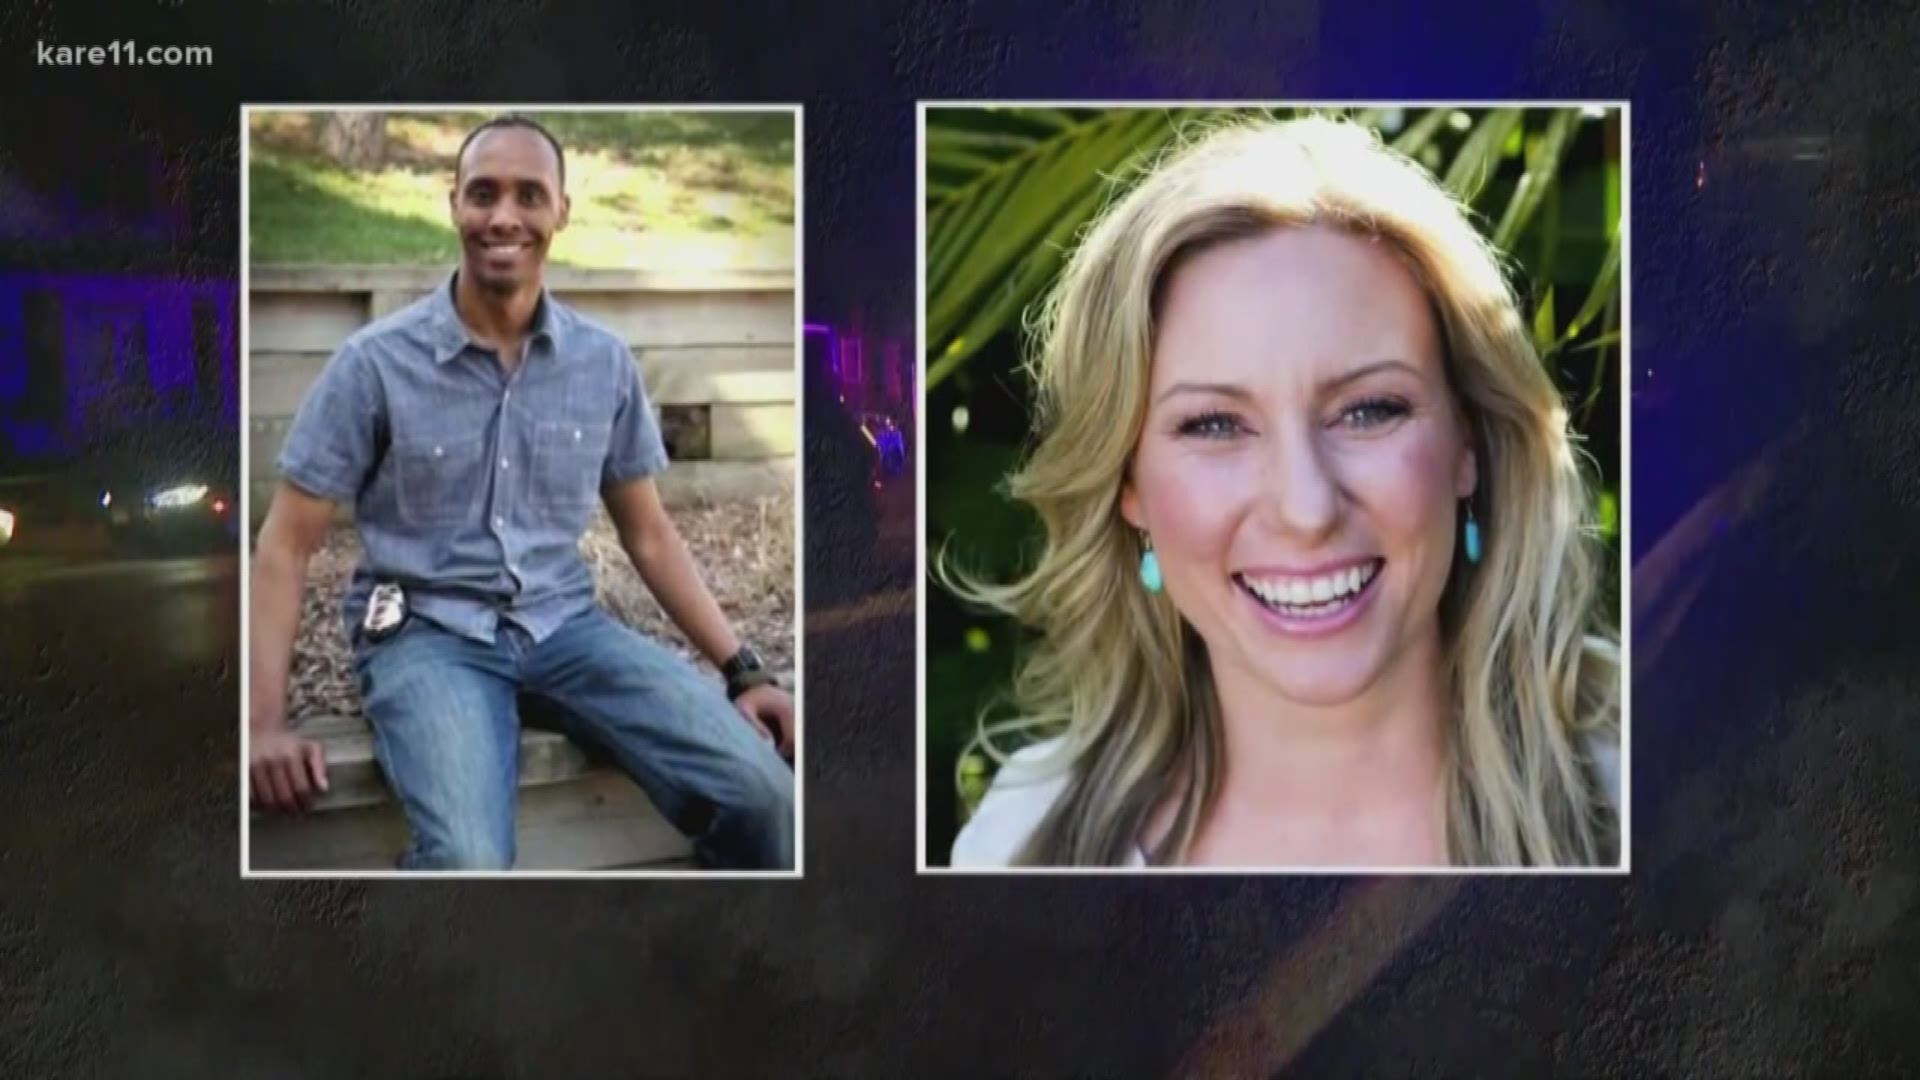 The prosecution's use of force experts say the use of force was not justified in the shooting death of Justine Ruszczyk Damond.